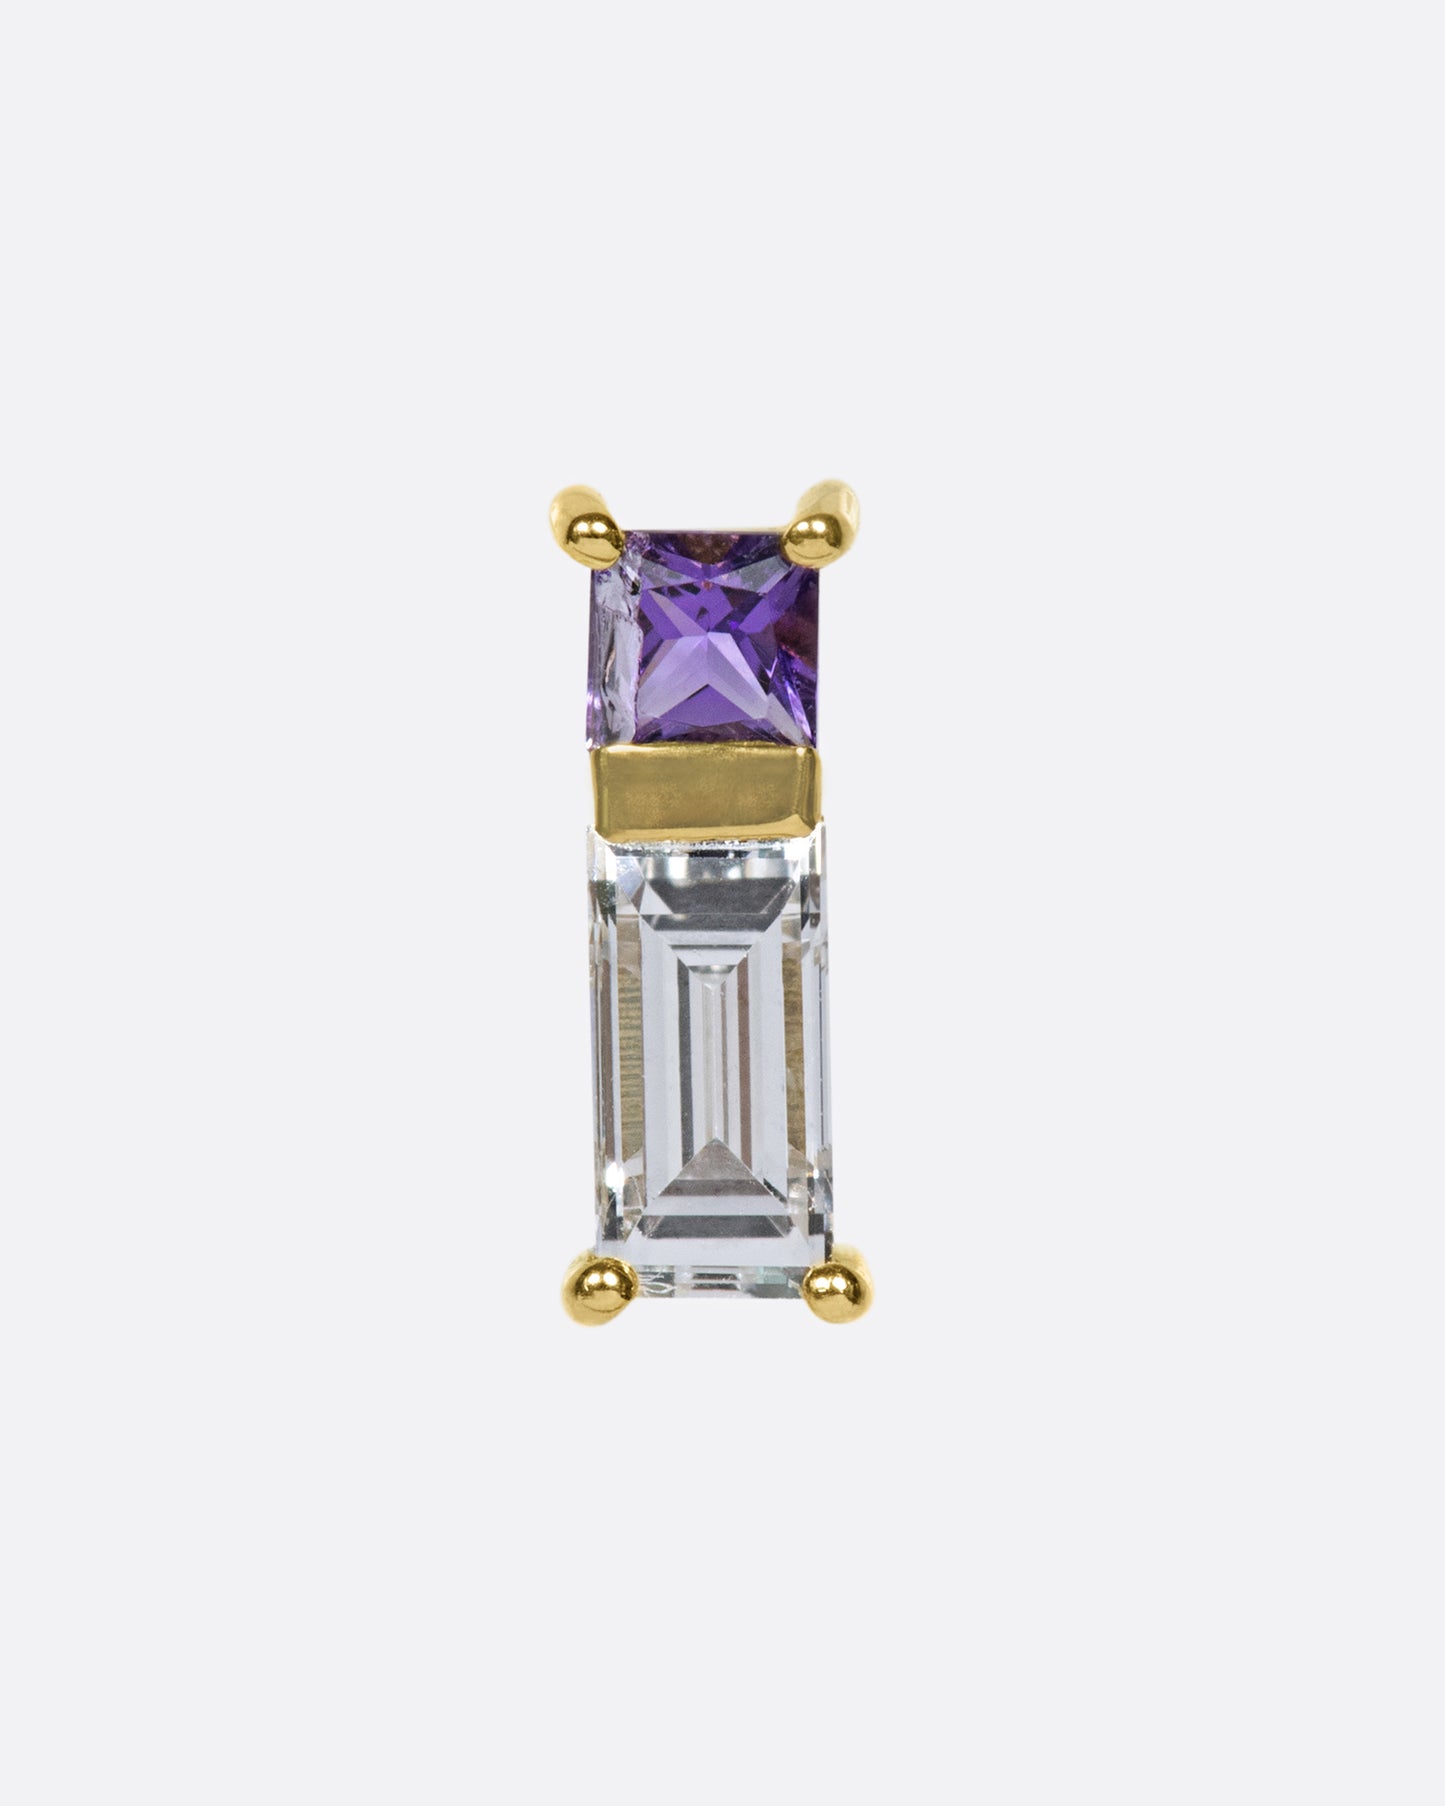 A play on color and geometry, this stud is made up of a princess cut amethyst and a baguette diamond.